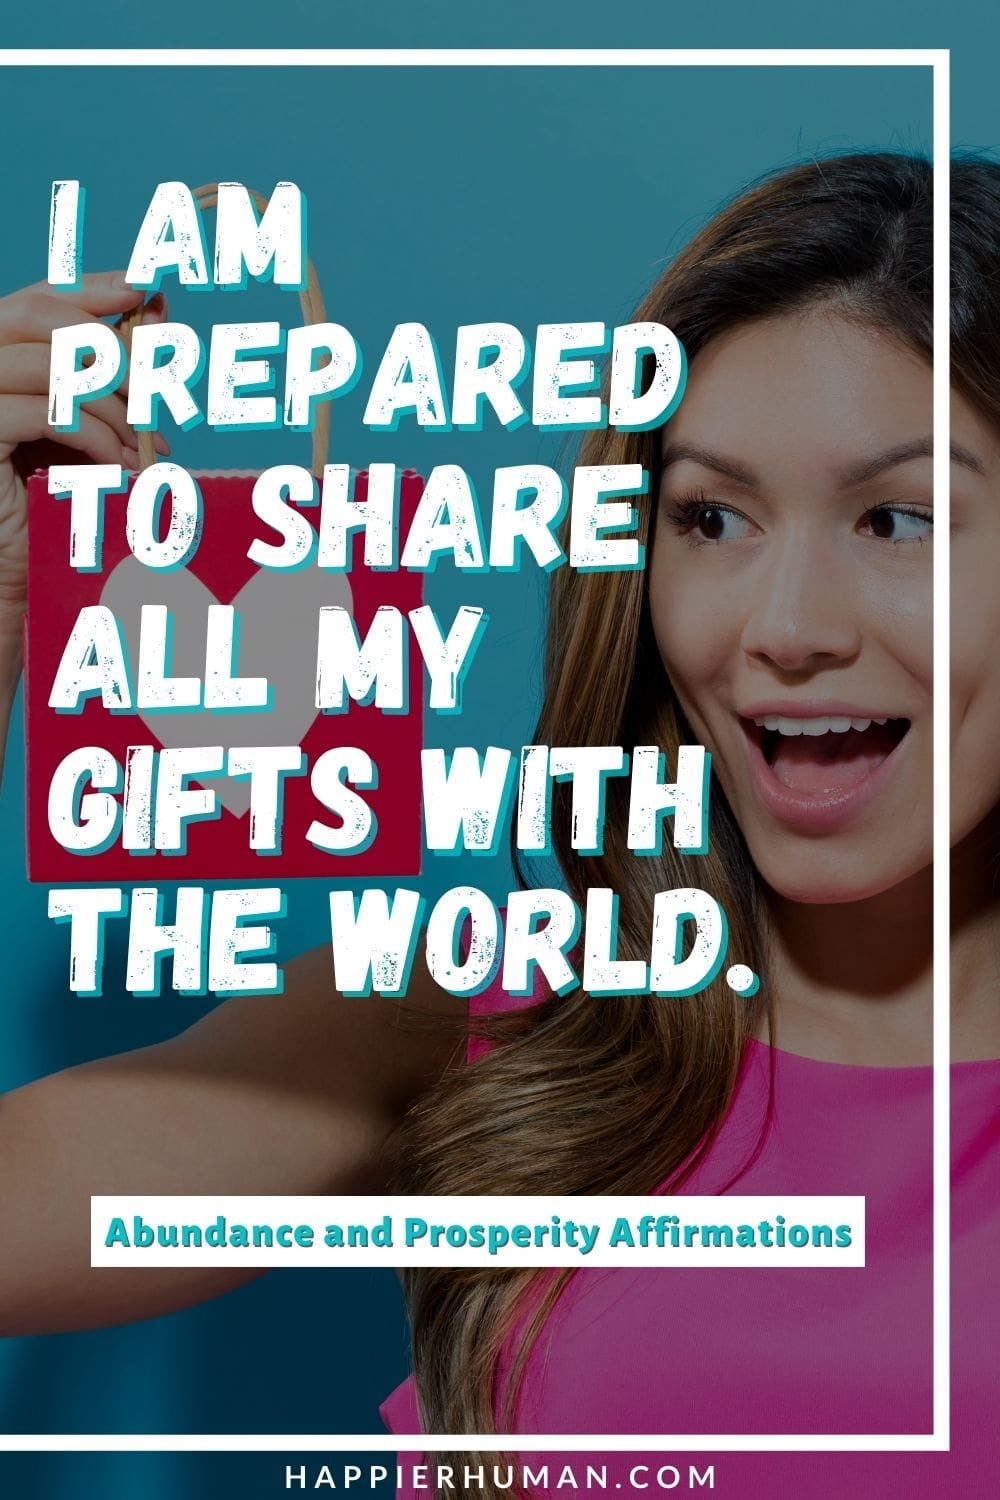 Abundance and Prosperity Affirmations - I am prepared to share all my gifts with the world. | spiritual affirmations for prosperity | power affirmations for manifesting wealth and abundance | gratitude affirmations for wealth #affirmation #mantra #inspirational